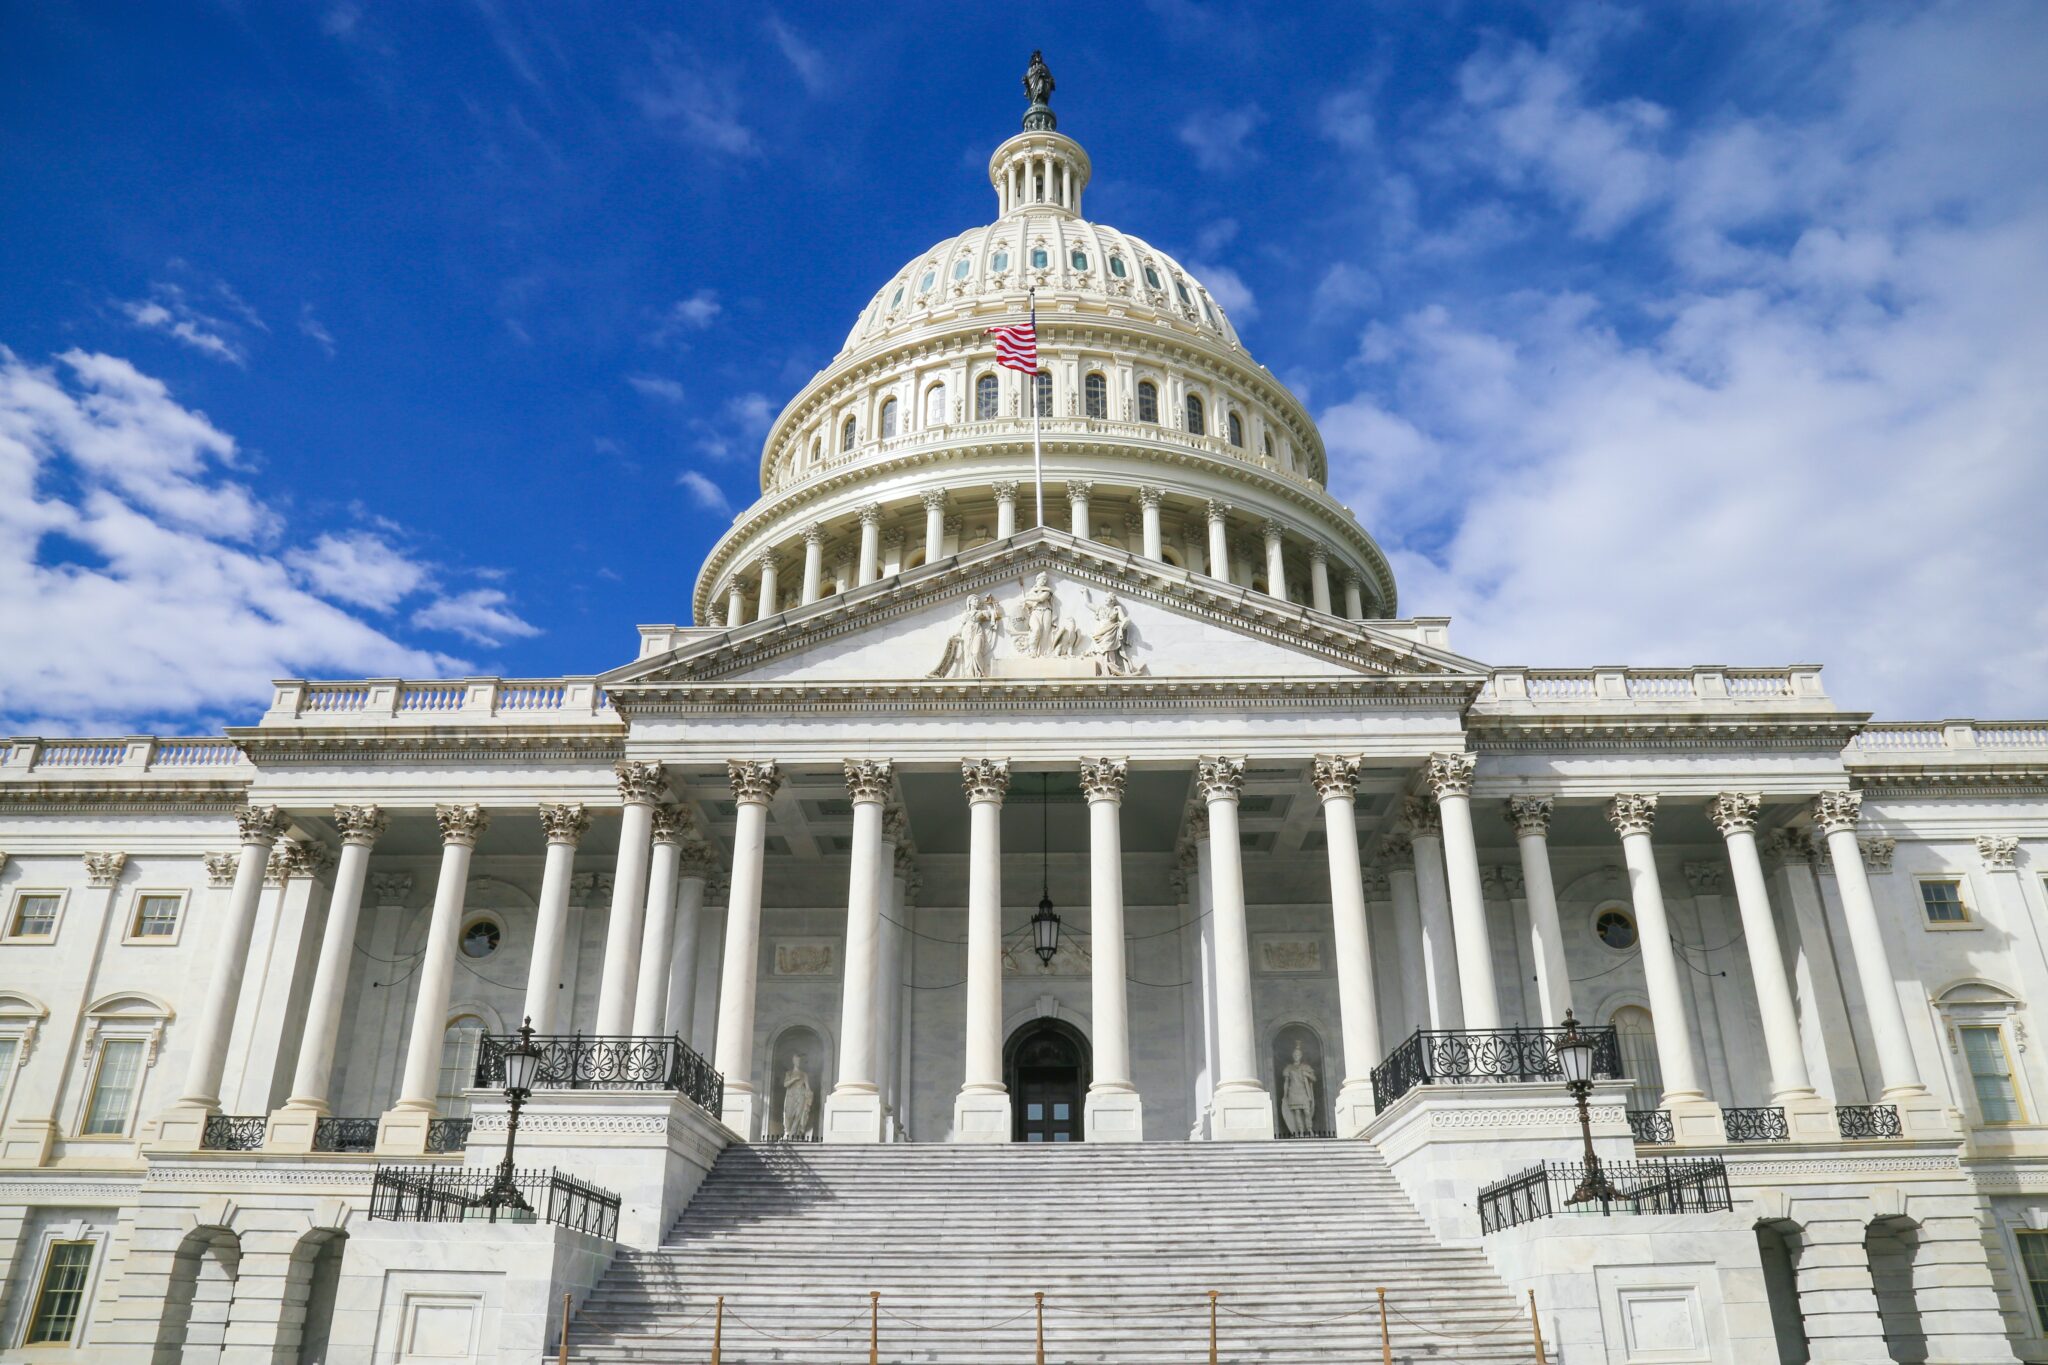 Congress considers incremental steps towards Medicare payment reform